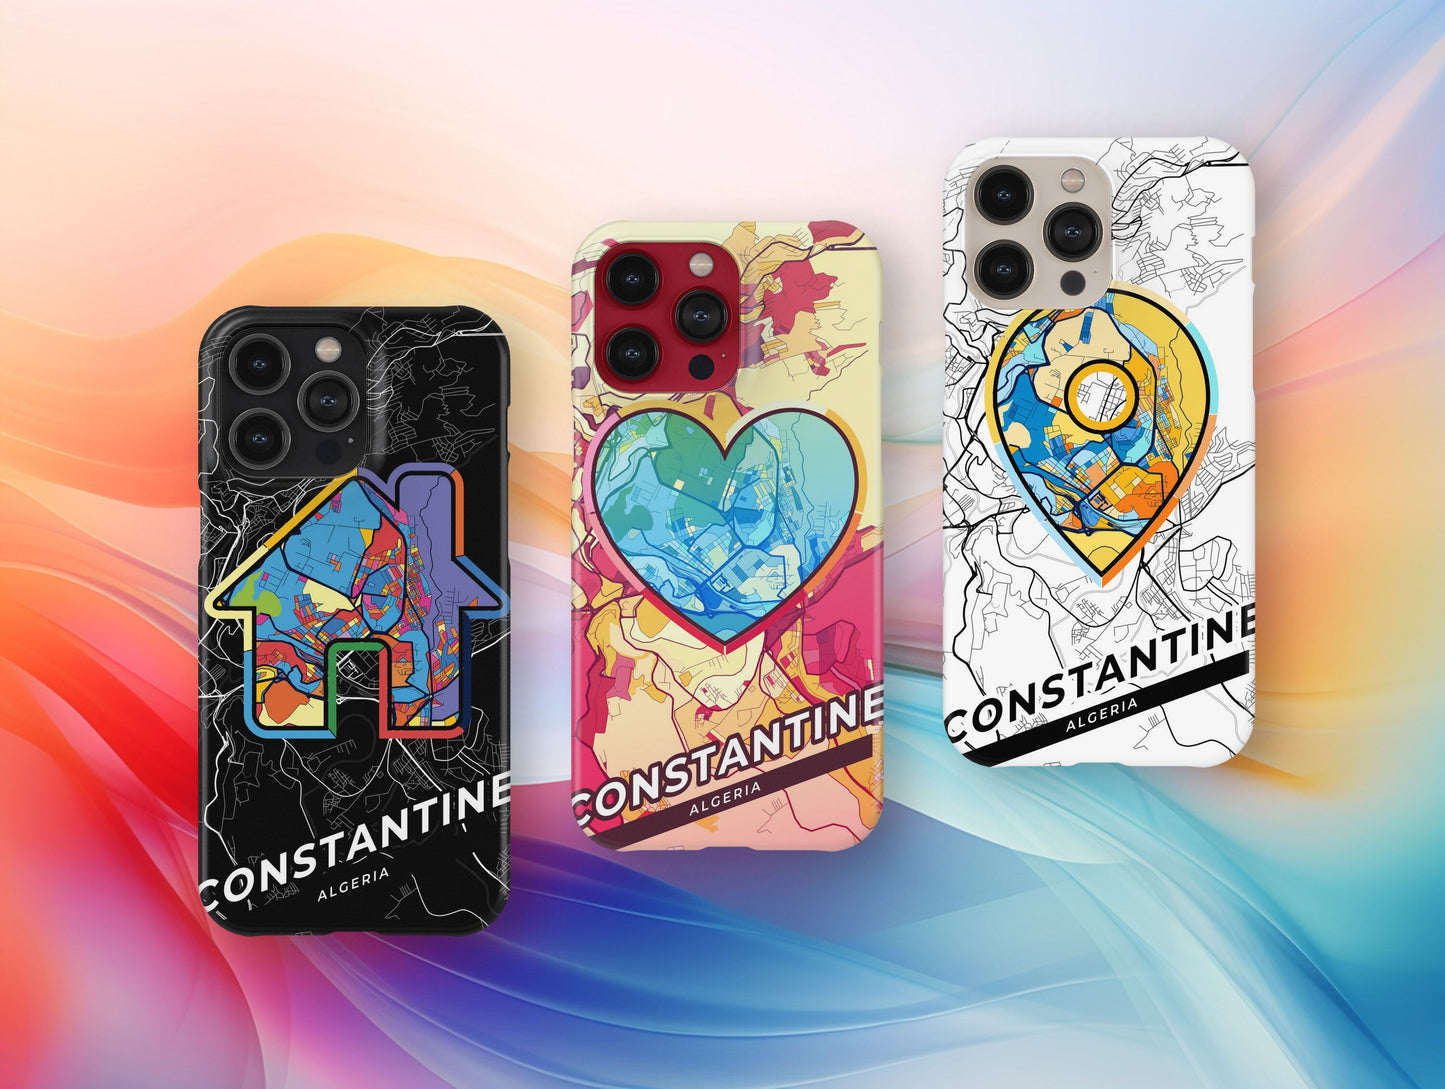 Constantine Algeria slim phone case with colorful icon. Birthday, wedding or housewarming gift. Couple match cases.